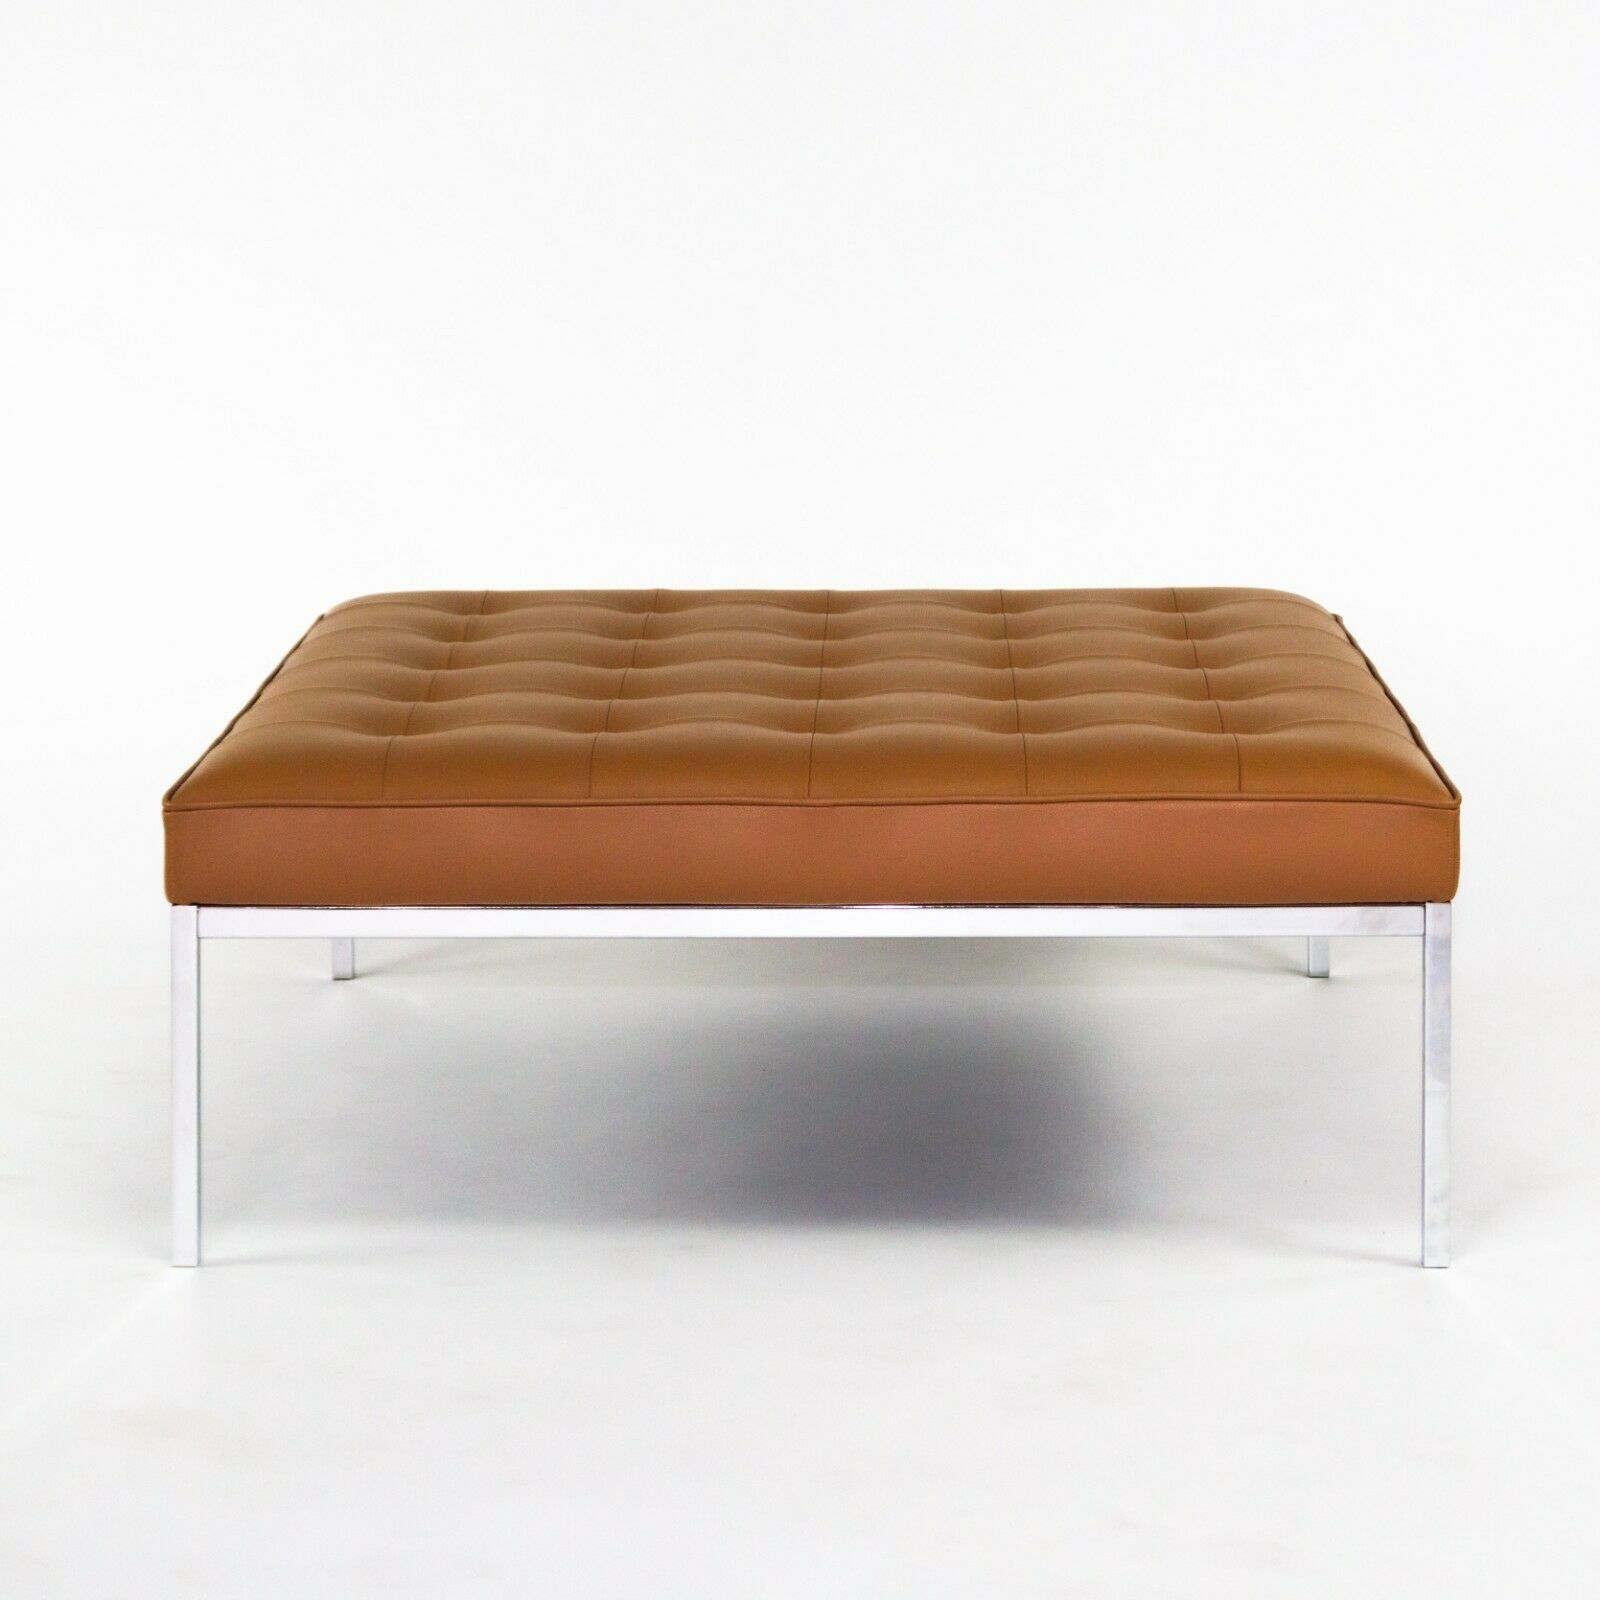 SOLD 2020 Florence Knoll Relaxed Small Square Bench in Caramel / Cognac Leather